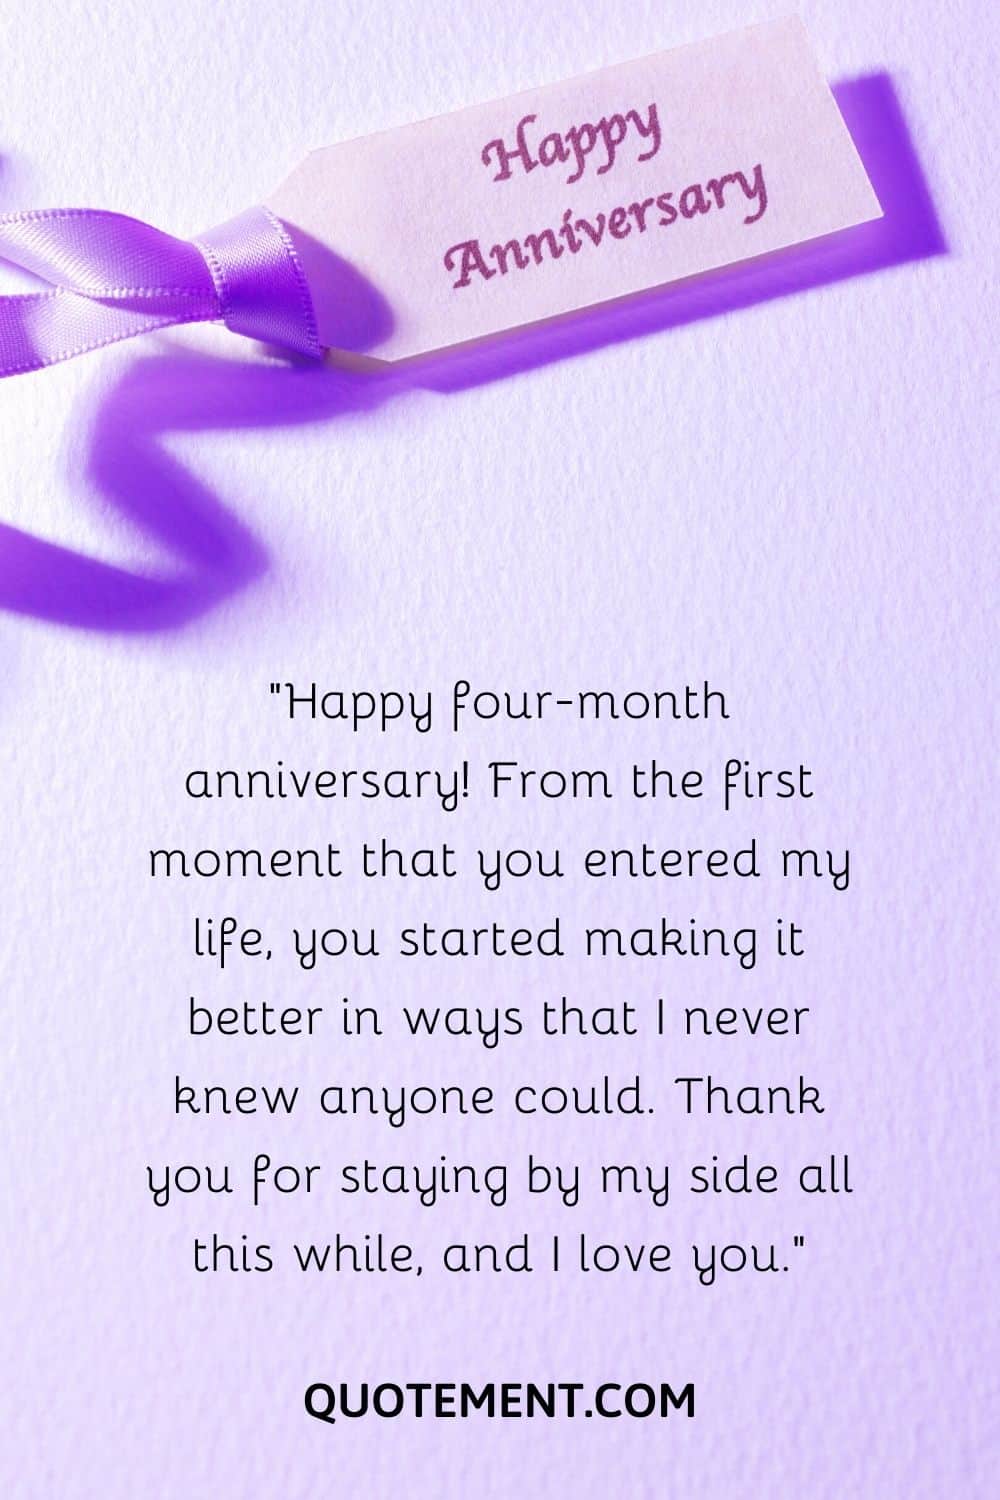 “Happy four-month anniversary!